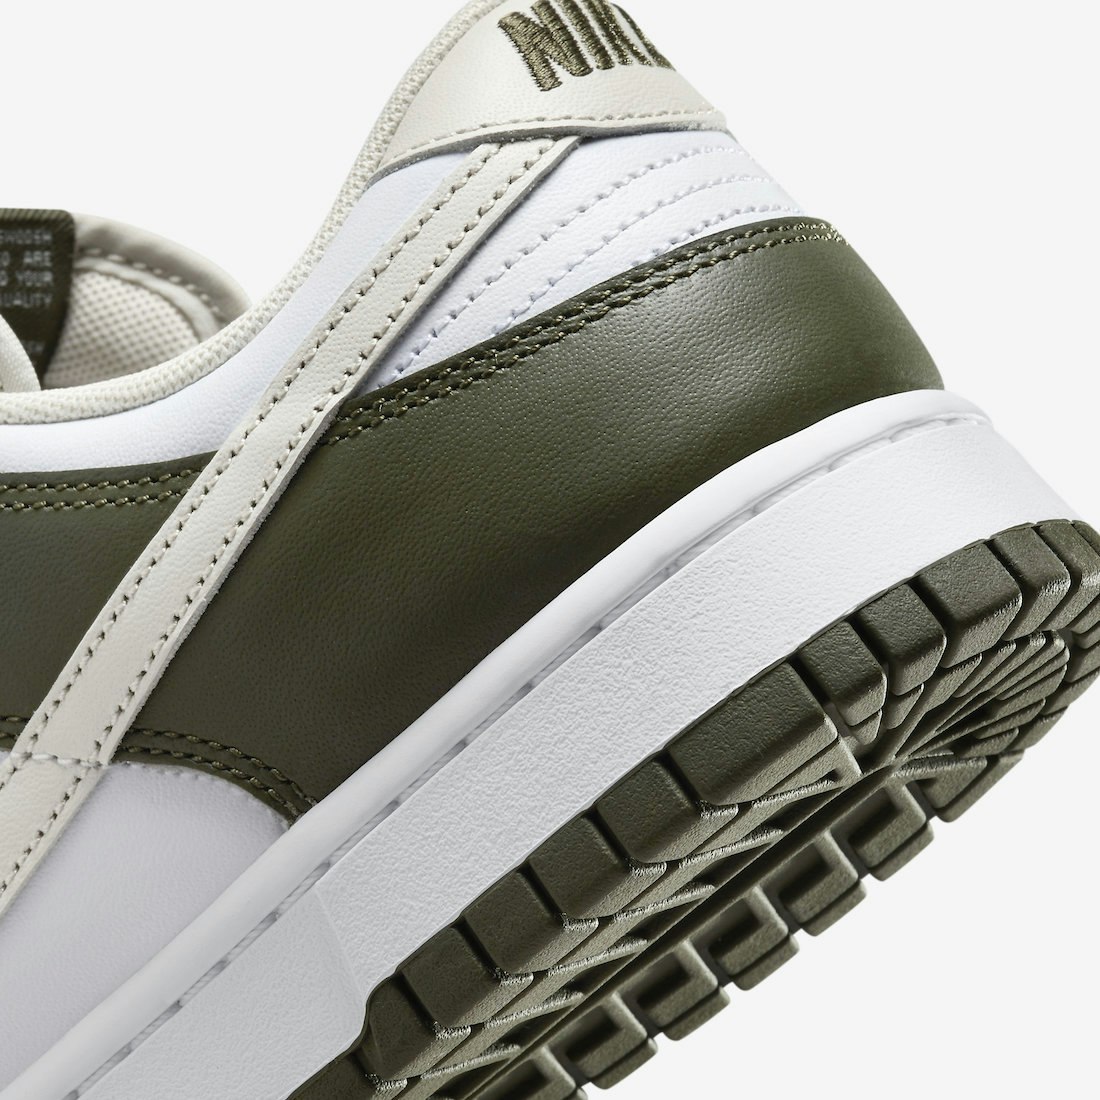 Nike Dunk Low "Olive Tones"